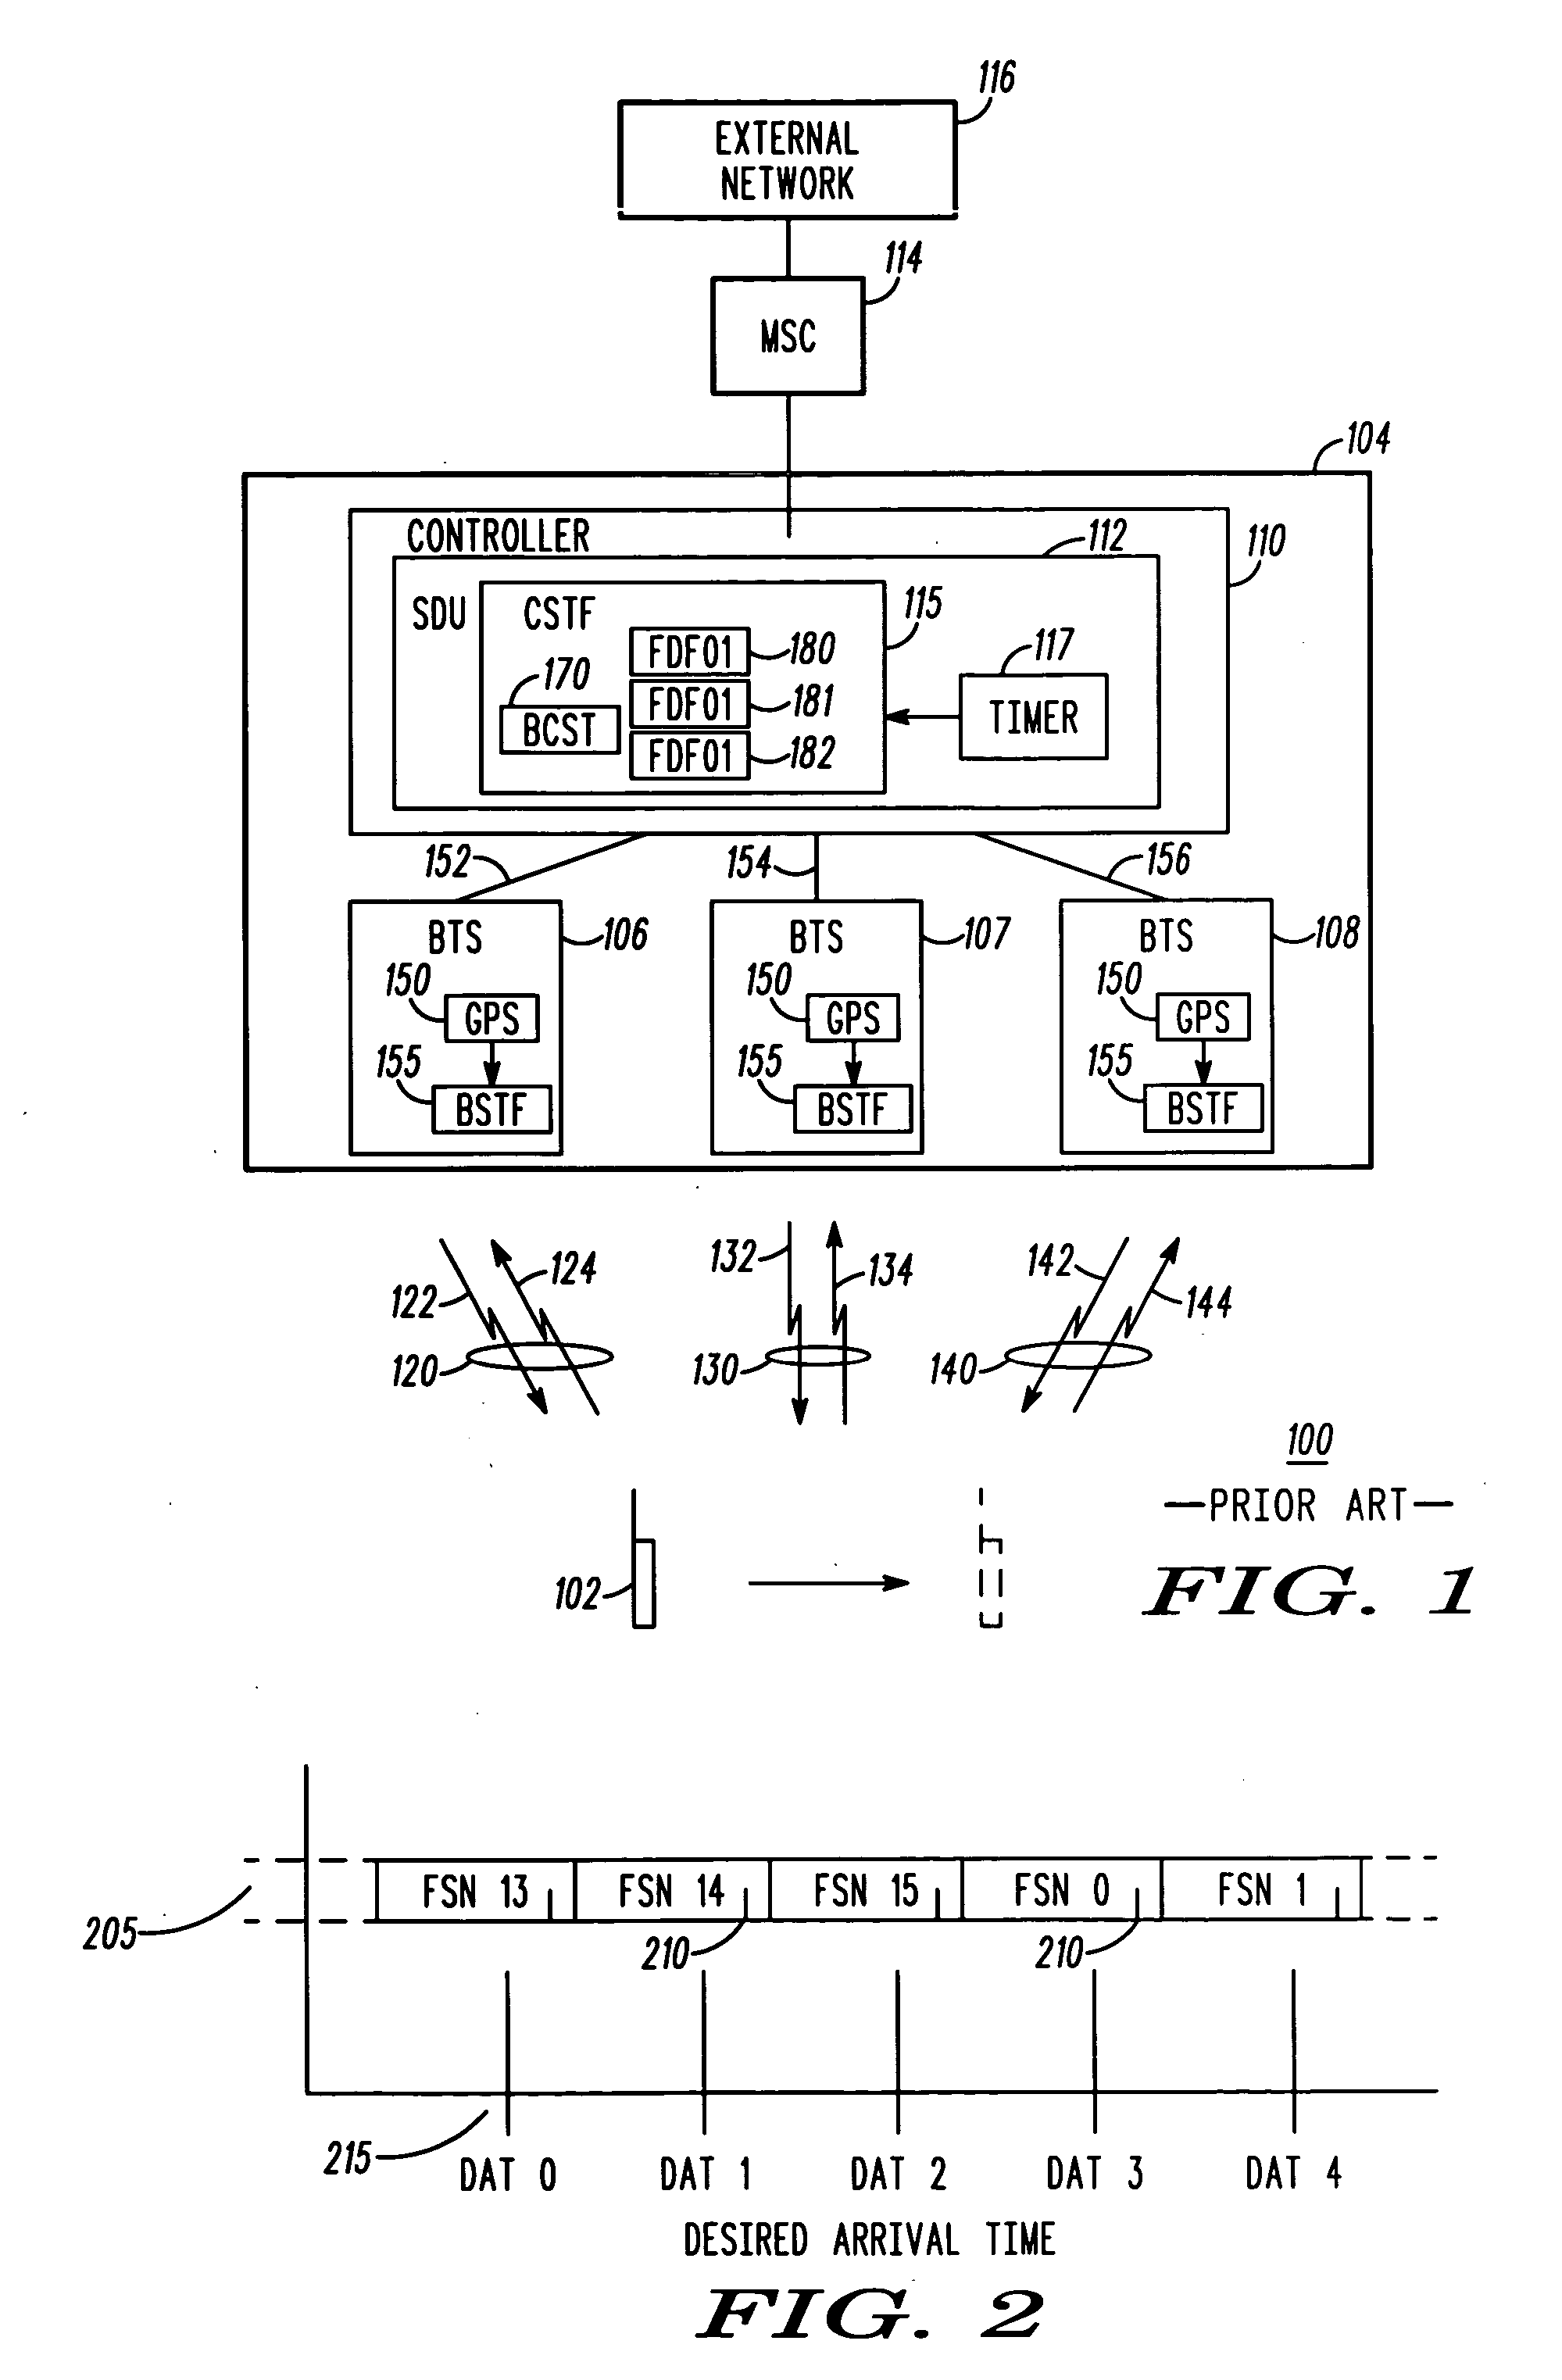 Timing compensation method and means for a terrestrial wireless communication system having satelite backhaul link